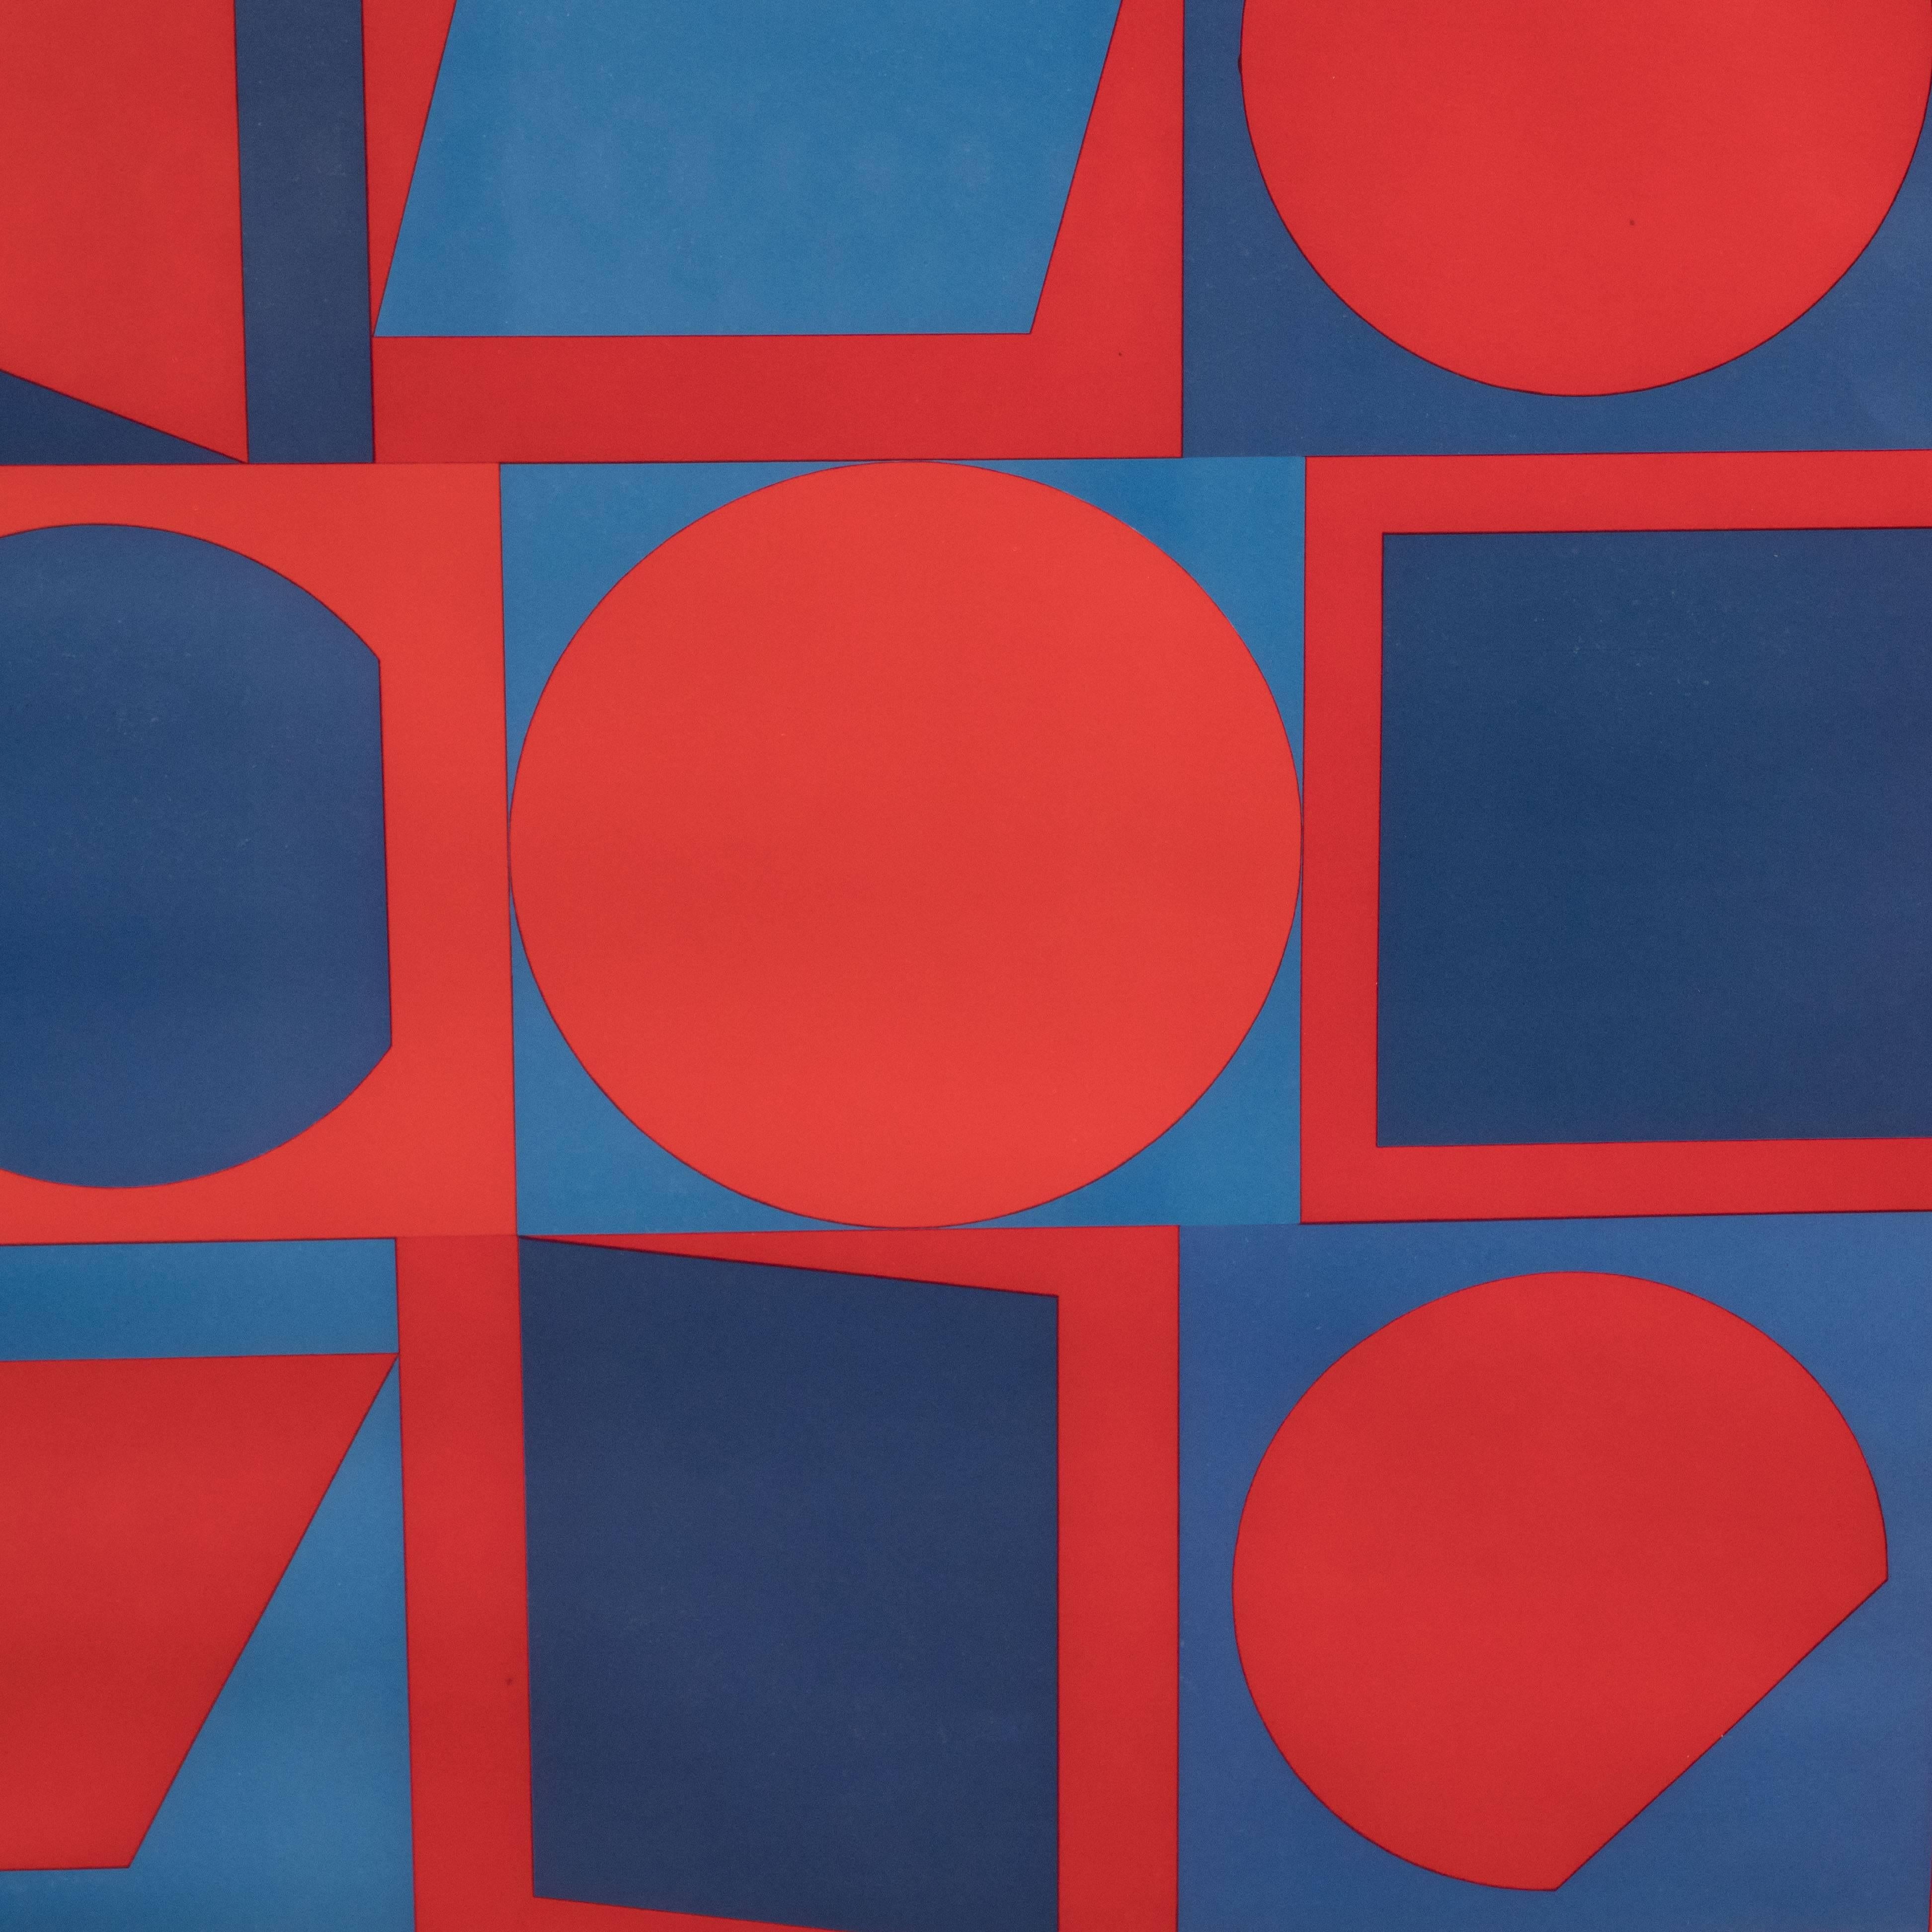 This first rate lithograph utilizes simple geometric shapes and hues of red and blue, in order to create a composition that is dynamic and visually arresting. Victor Vasarely is one of the pioneers of Op-Art, a movement of the 1960s, that proved